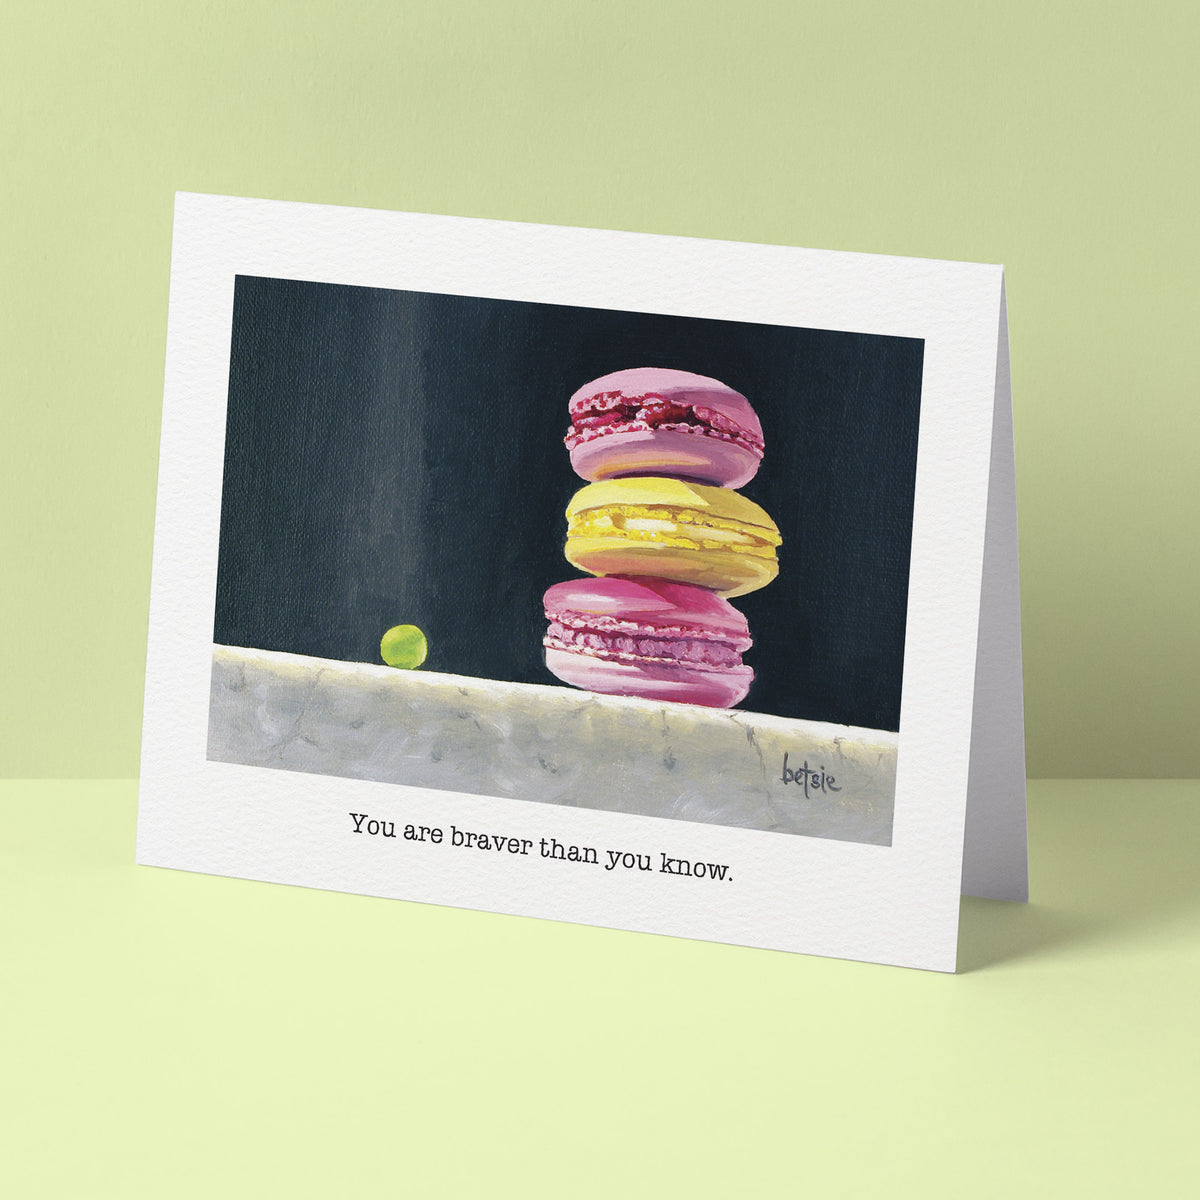 "You are braver than you know" Greeting Card